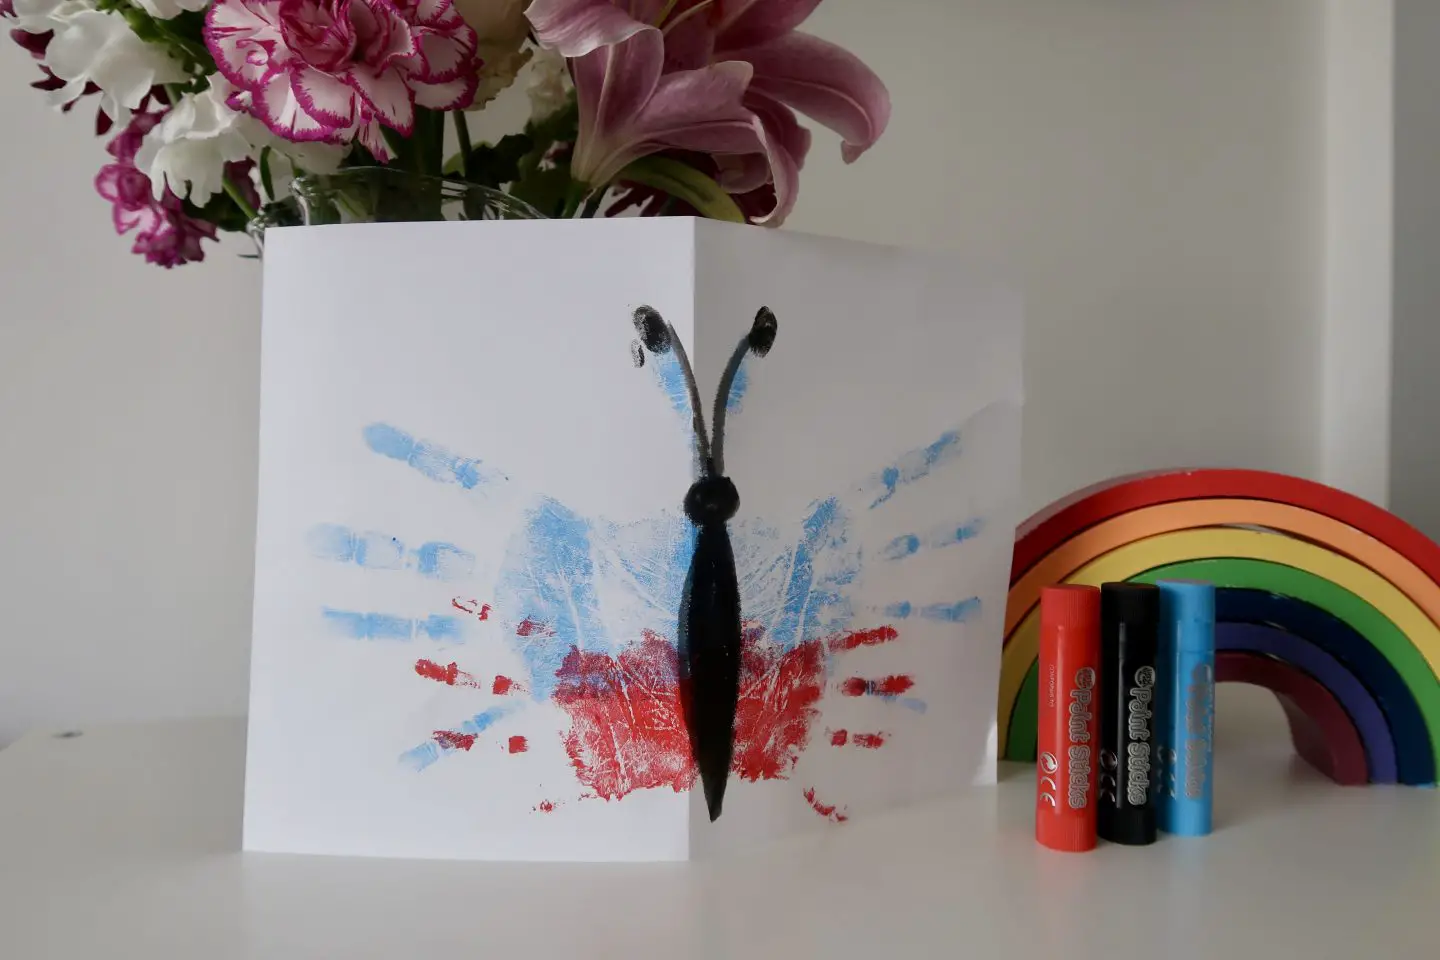 A card with a butterfly on it, made out of handprints, next to a bunch of flowers, a wooden rainbow and some paint sticks